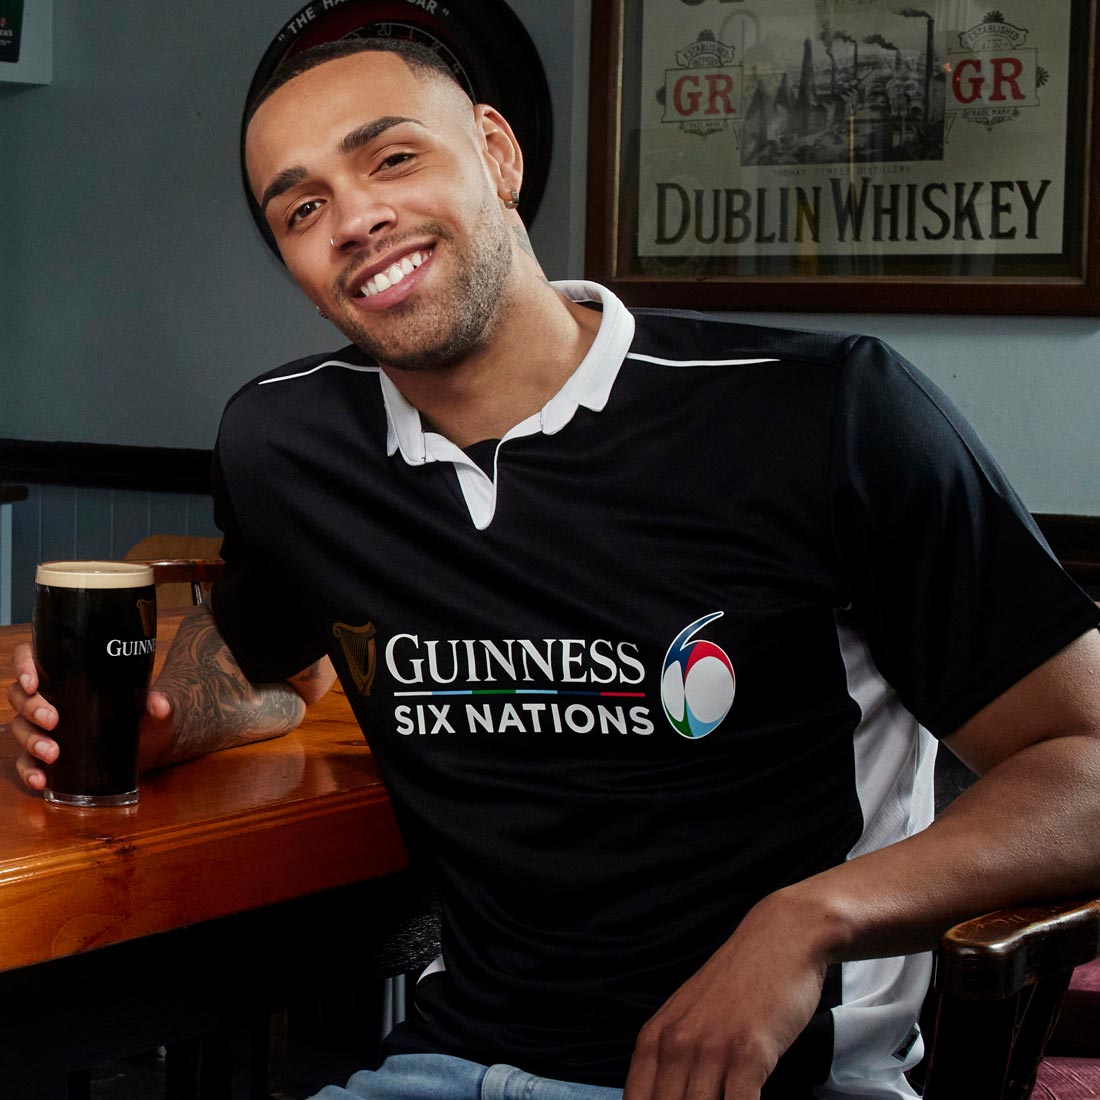 Get your Guinness UK Six Nations rugby shirt and show off your support as a passionate Guinness 6 Nations Performance Rugby Jersey fan.